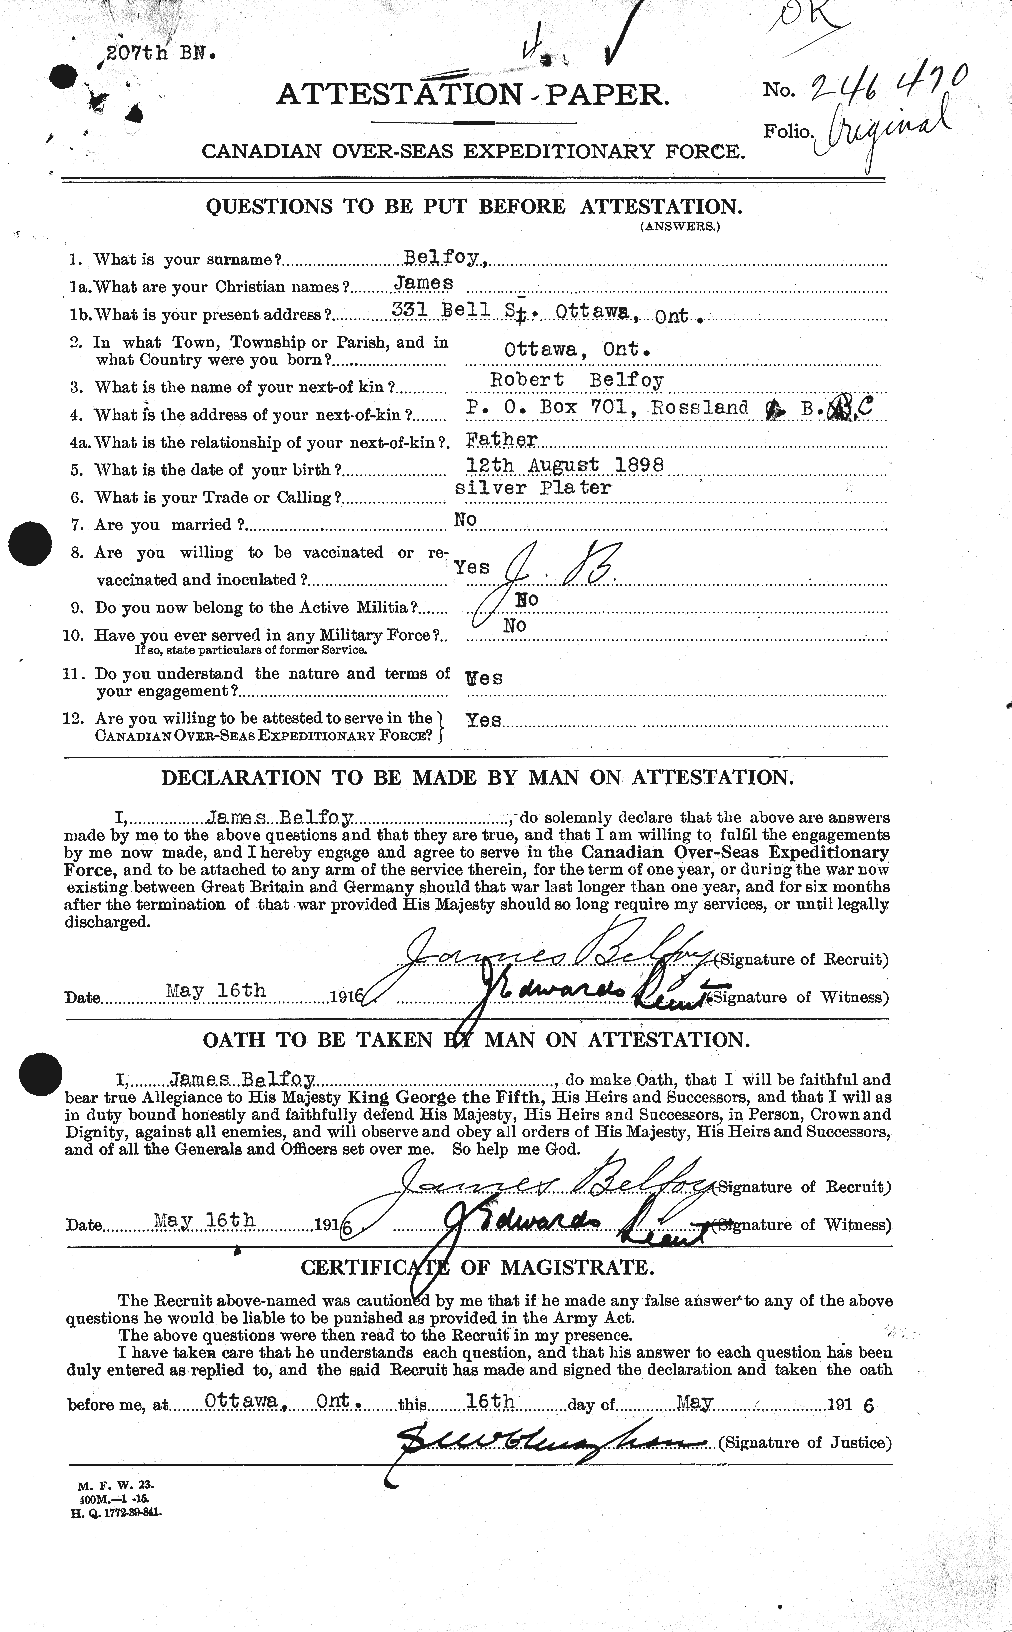 Personnel Records of the First World War - CEF 232454a